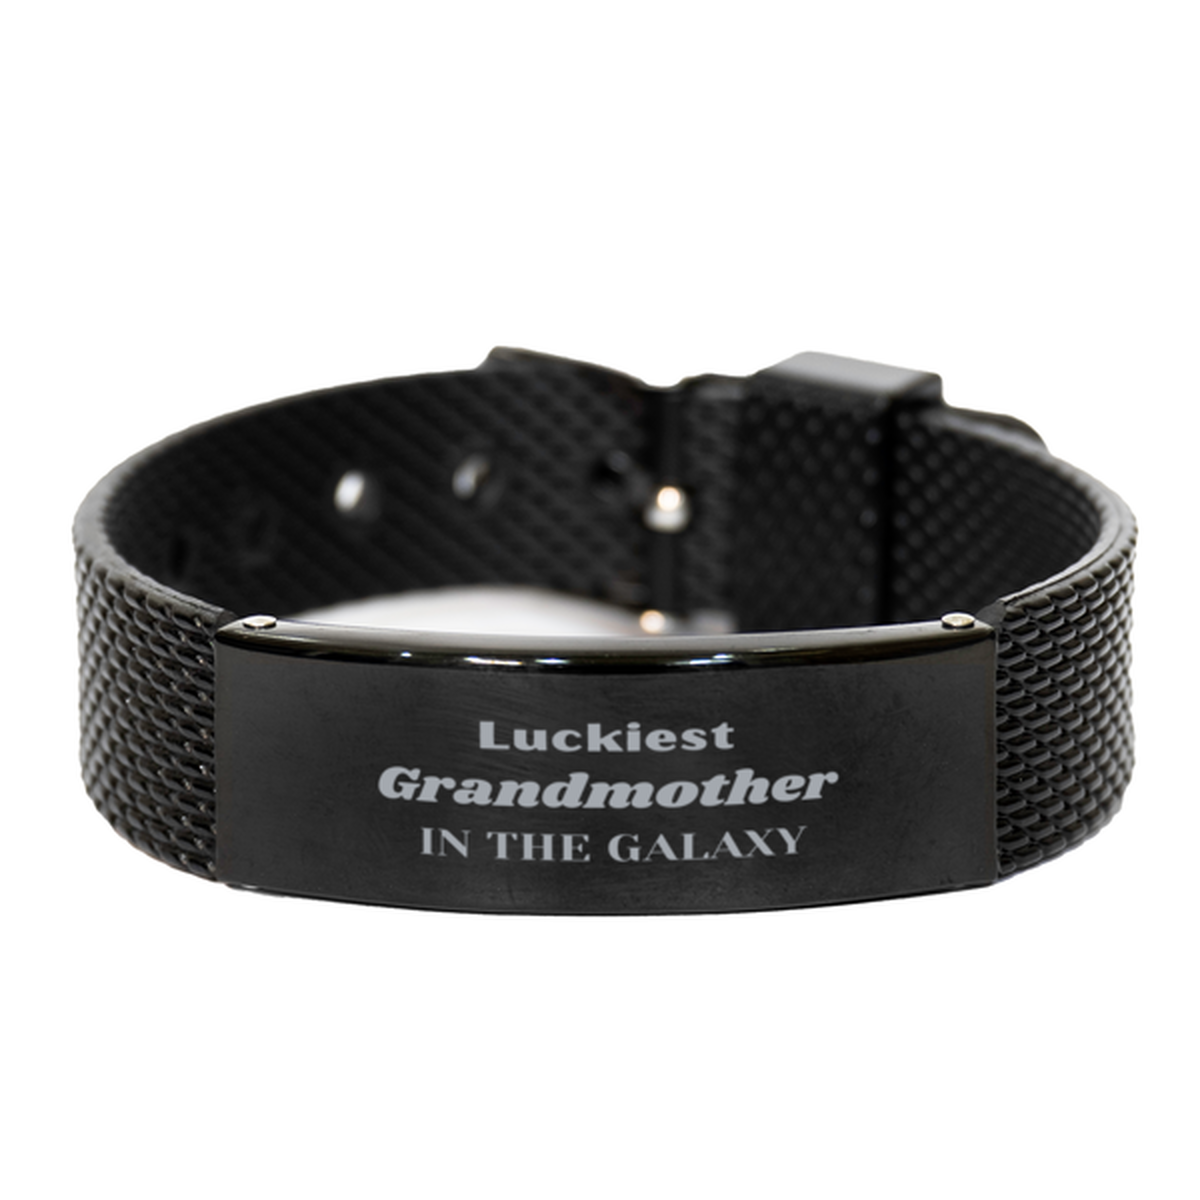 Luckiest Grandmother in the Galaxy, To My Grandmother Engraved Gifts, Christmas Grandmother Black Shark Mesh Bracelet Gifts, X-mas Birthday Unique Gifts For Grandmother Men Women